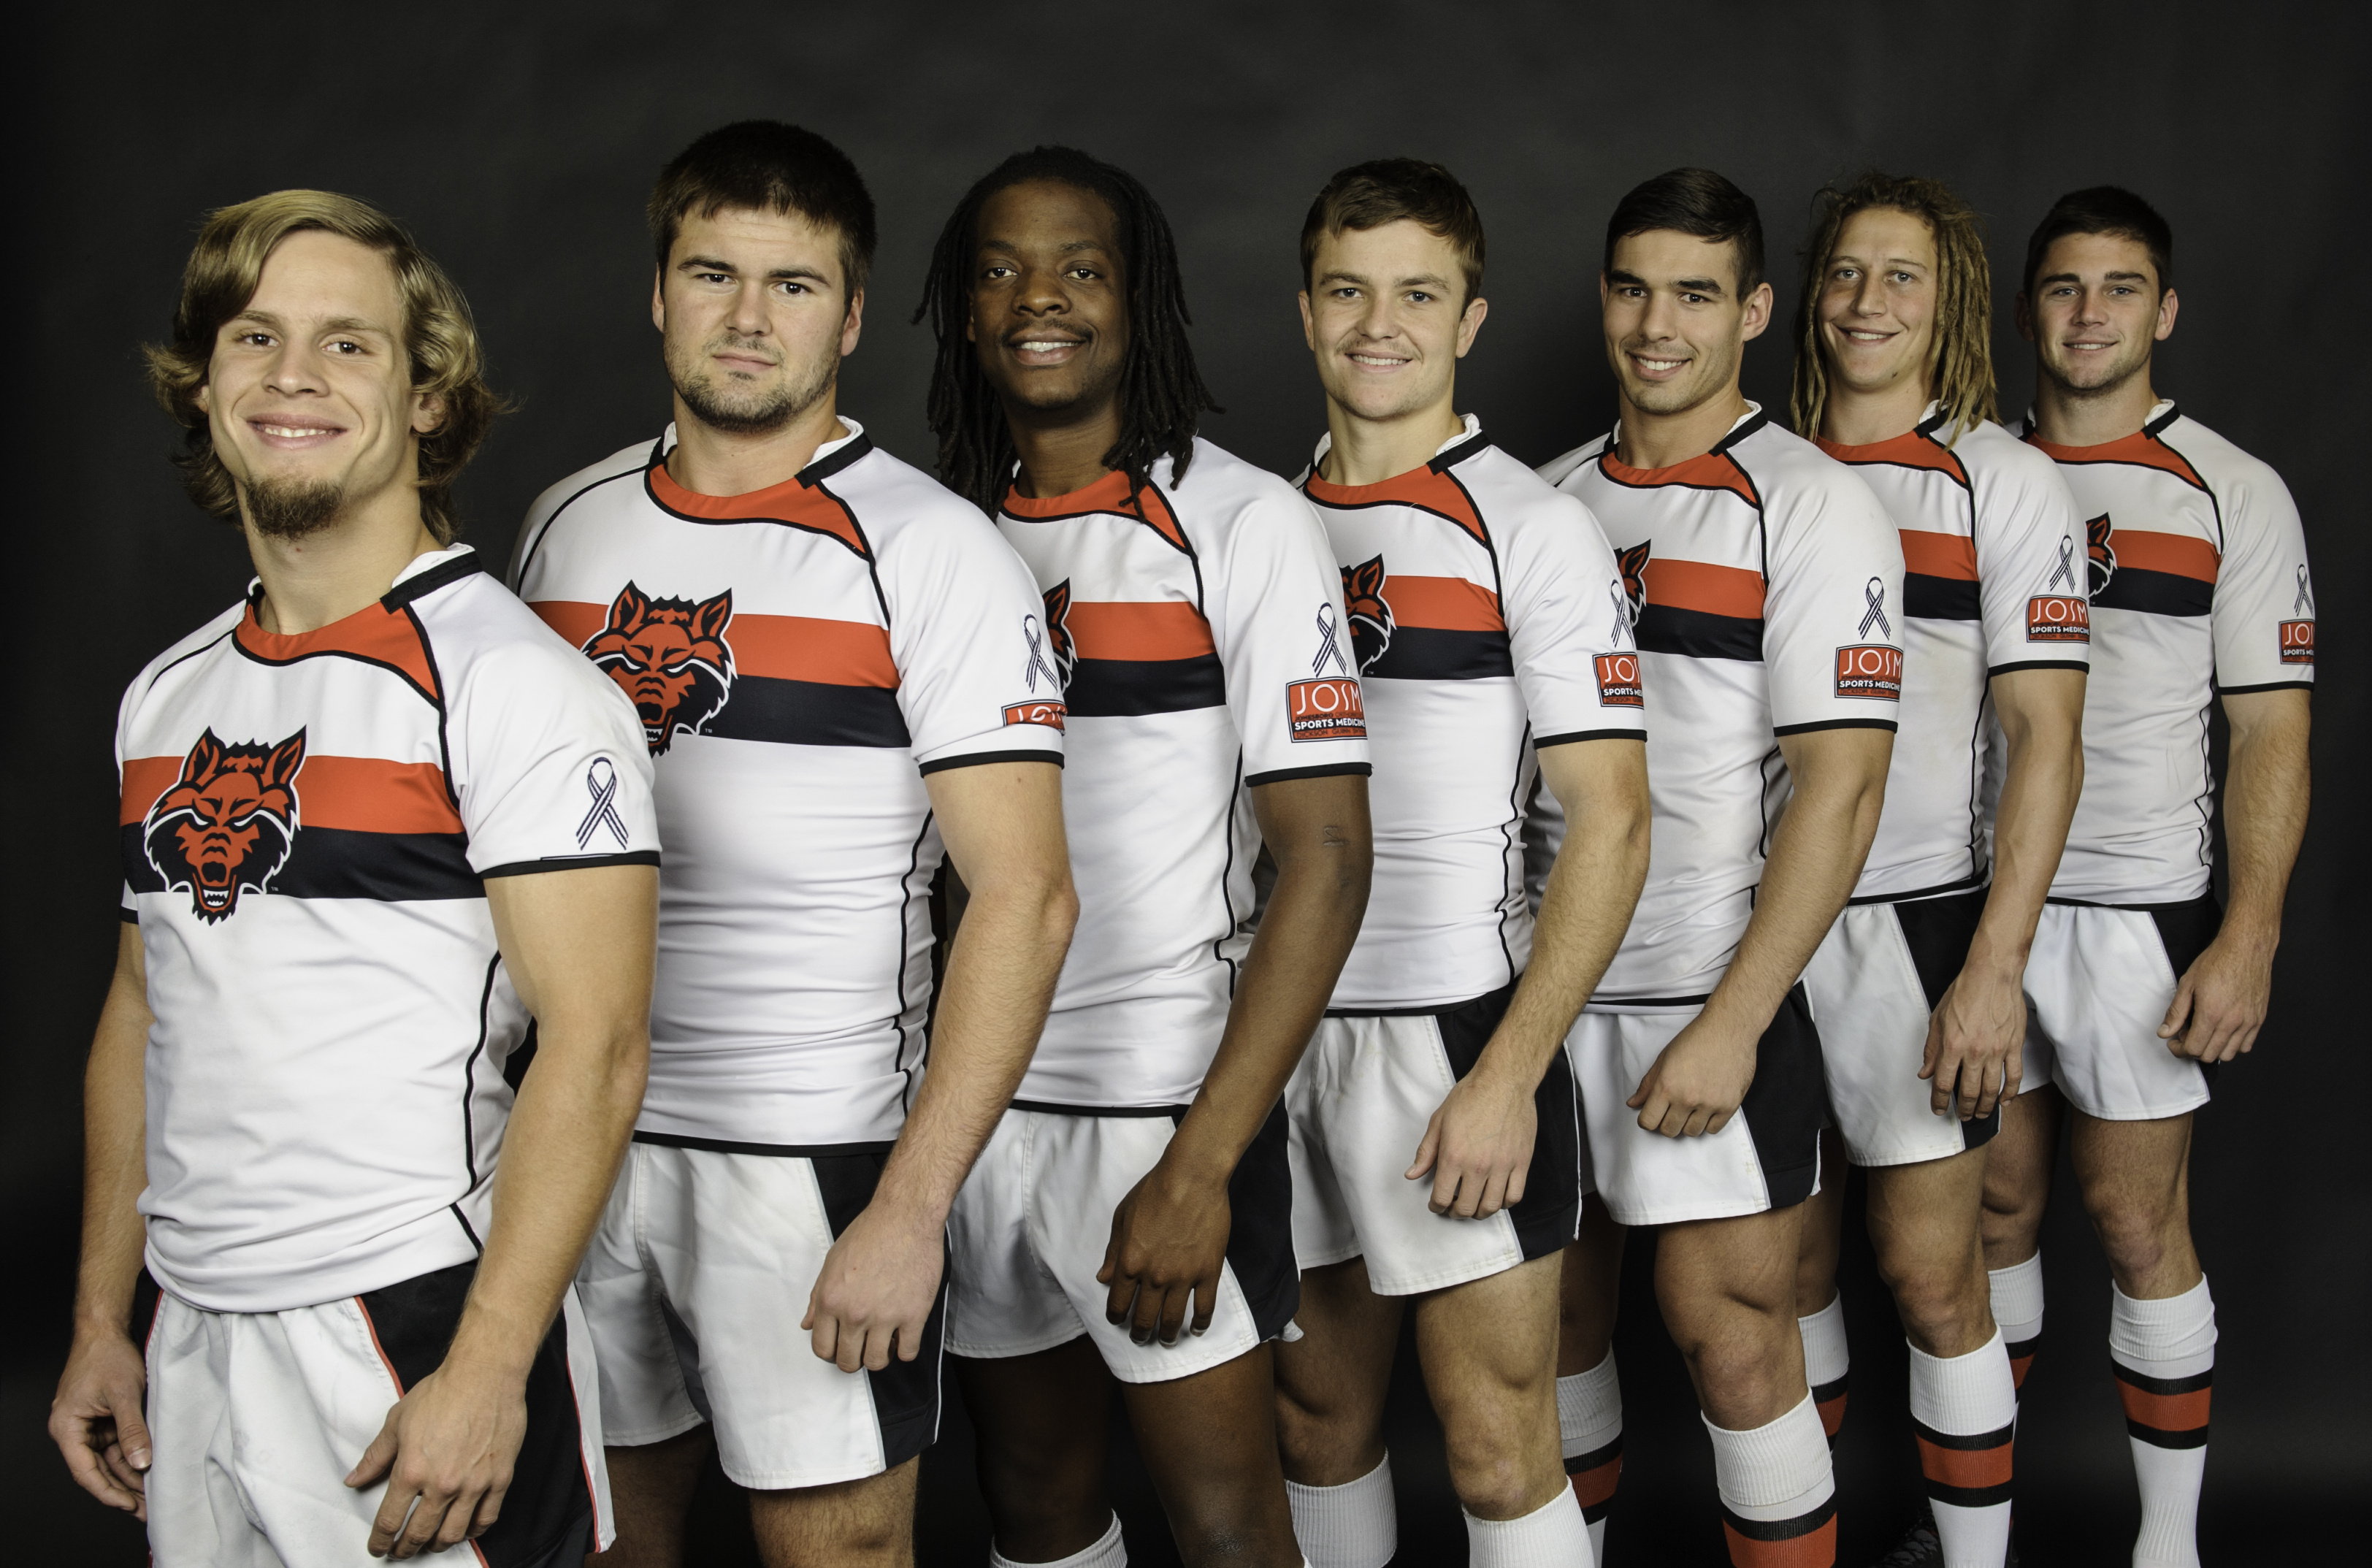 Rugby Team with ALS ribbon